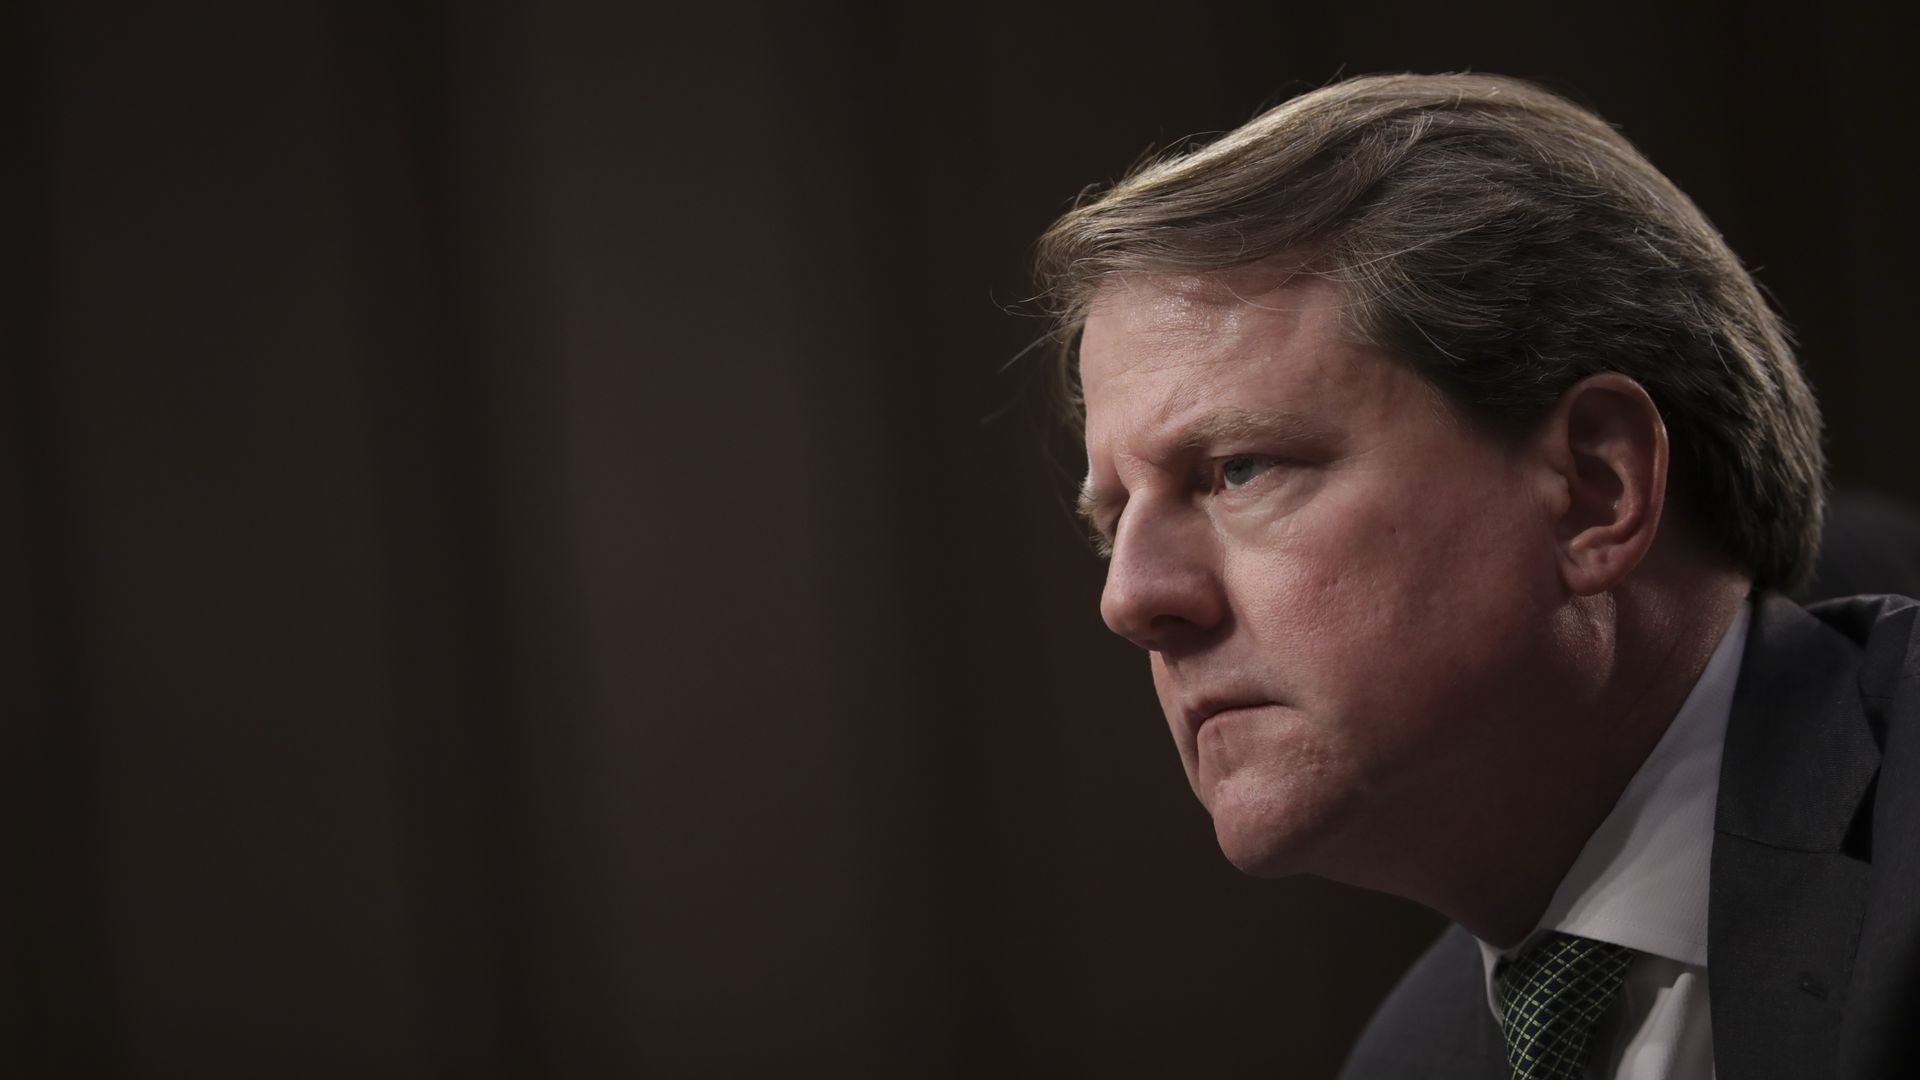 In this image, Don McGahn looks to the left.